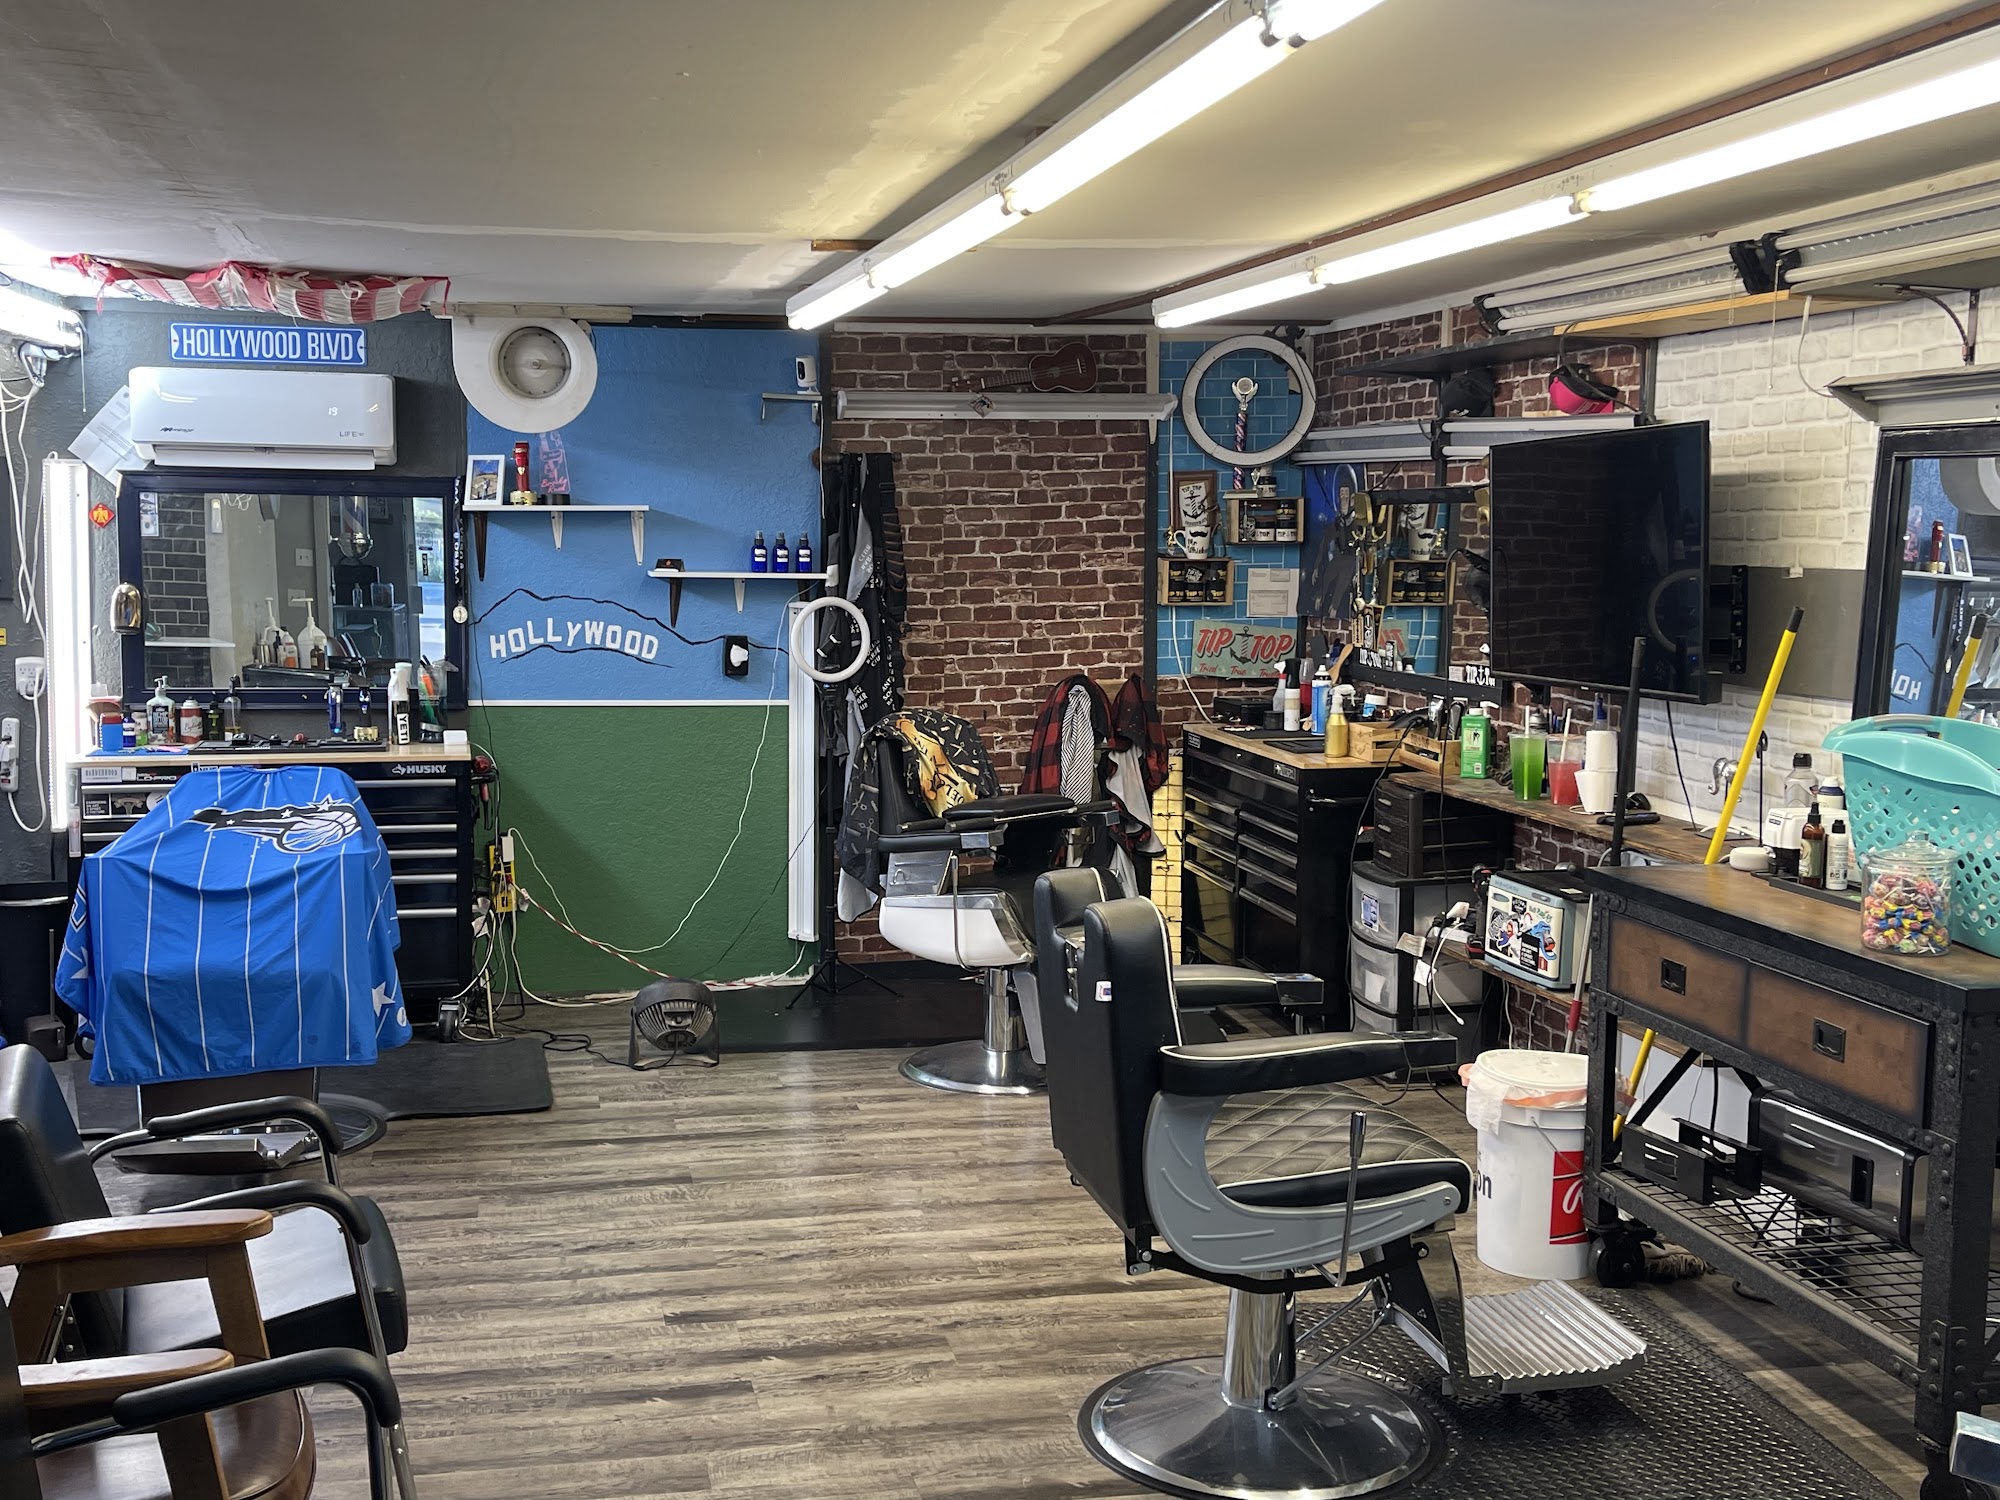 Whiskers Barbershop and Salon 513 E Main St, Weatherford Oklahoma 73096